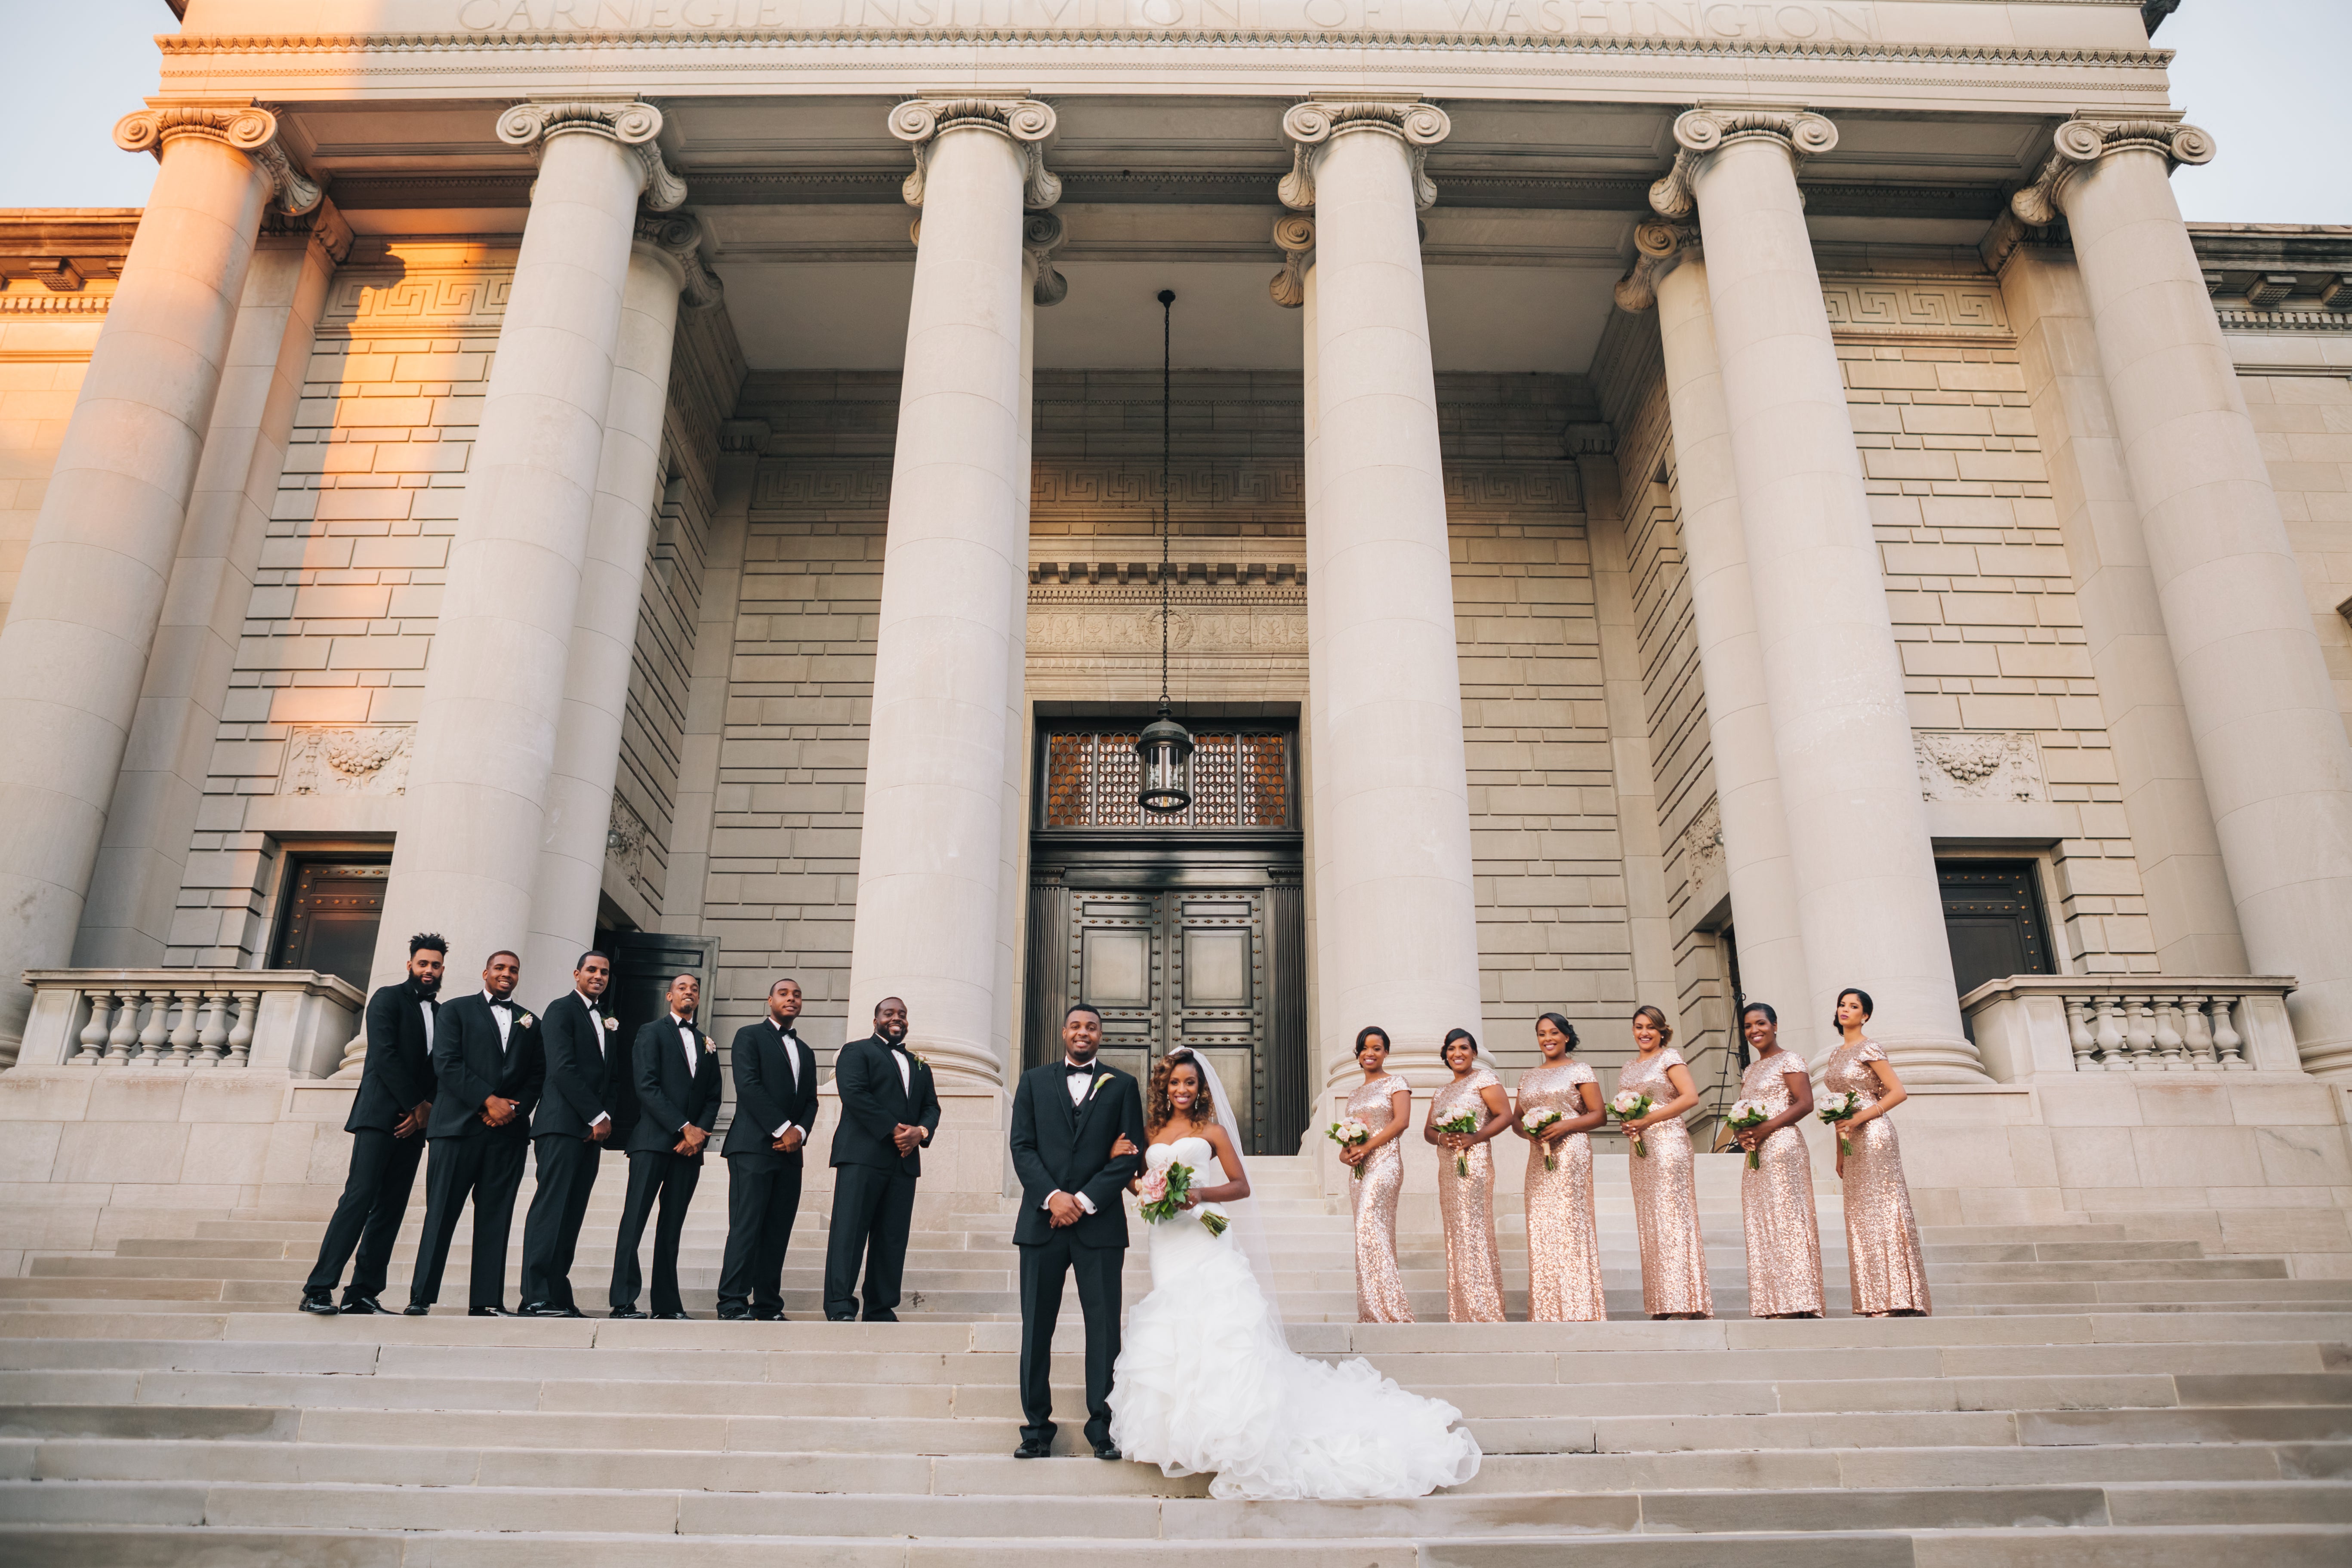 Bridal Bliss: Robert and Jeanette’s Modern D.C. Wedding Was Stunning